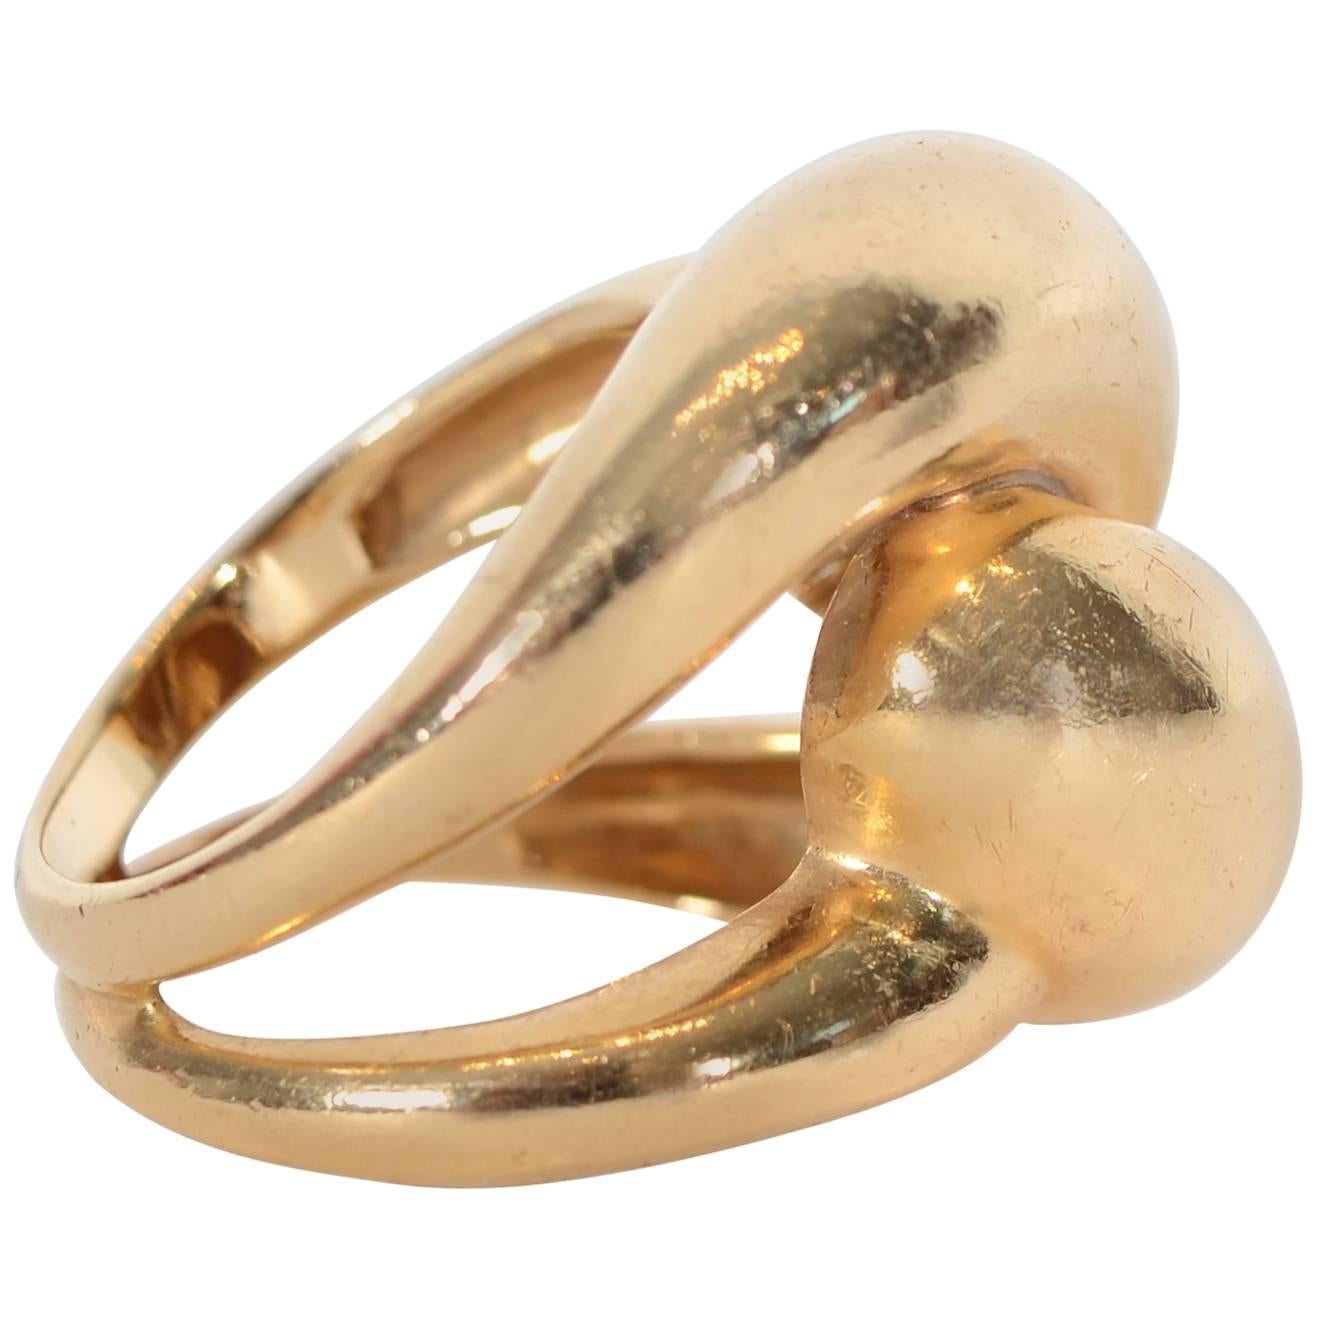 Bulbous knot ring of 14 karat gold suitable for a man or woman. The ring is size 6 . It can easily be sized up or down by adapting the two bands that join as the shank. 